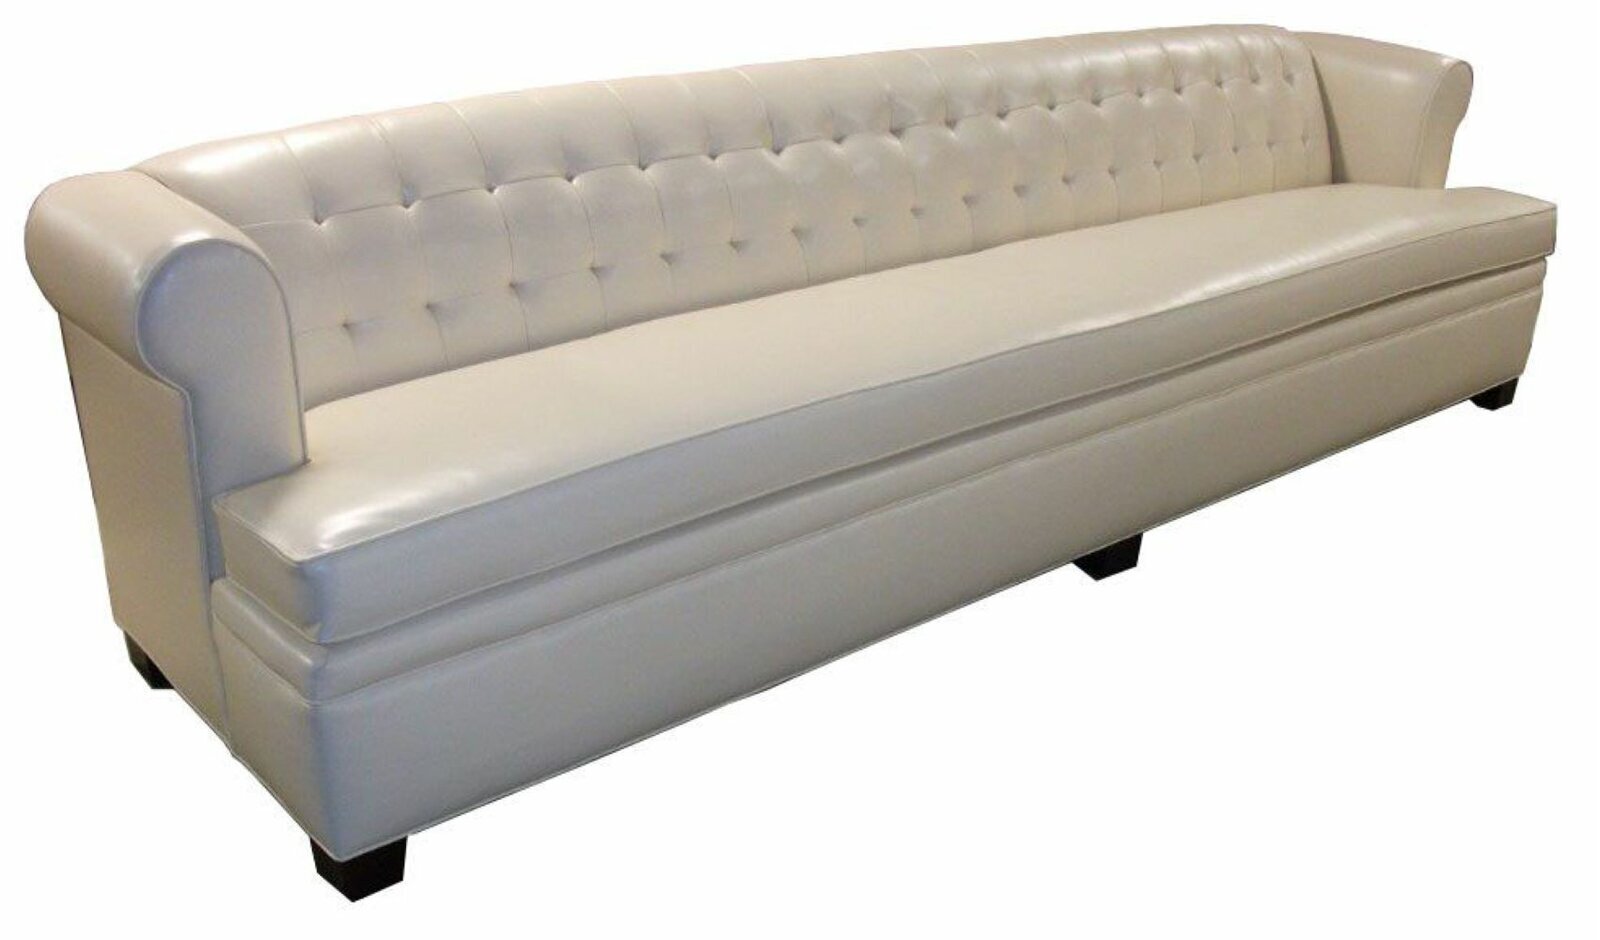 Leather Banquette Bench that Seats Five or More